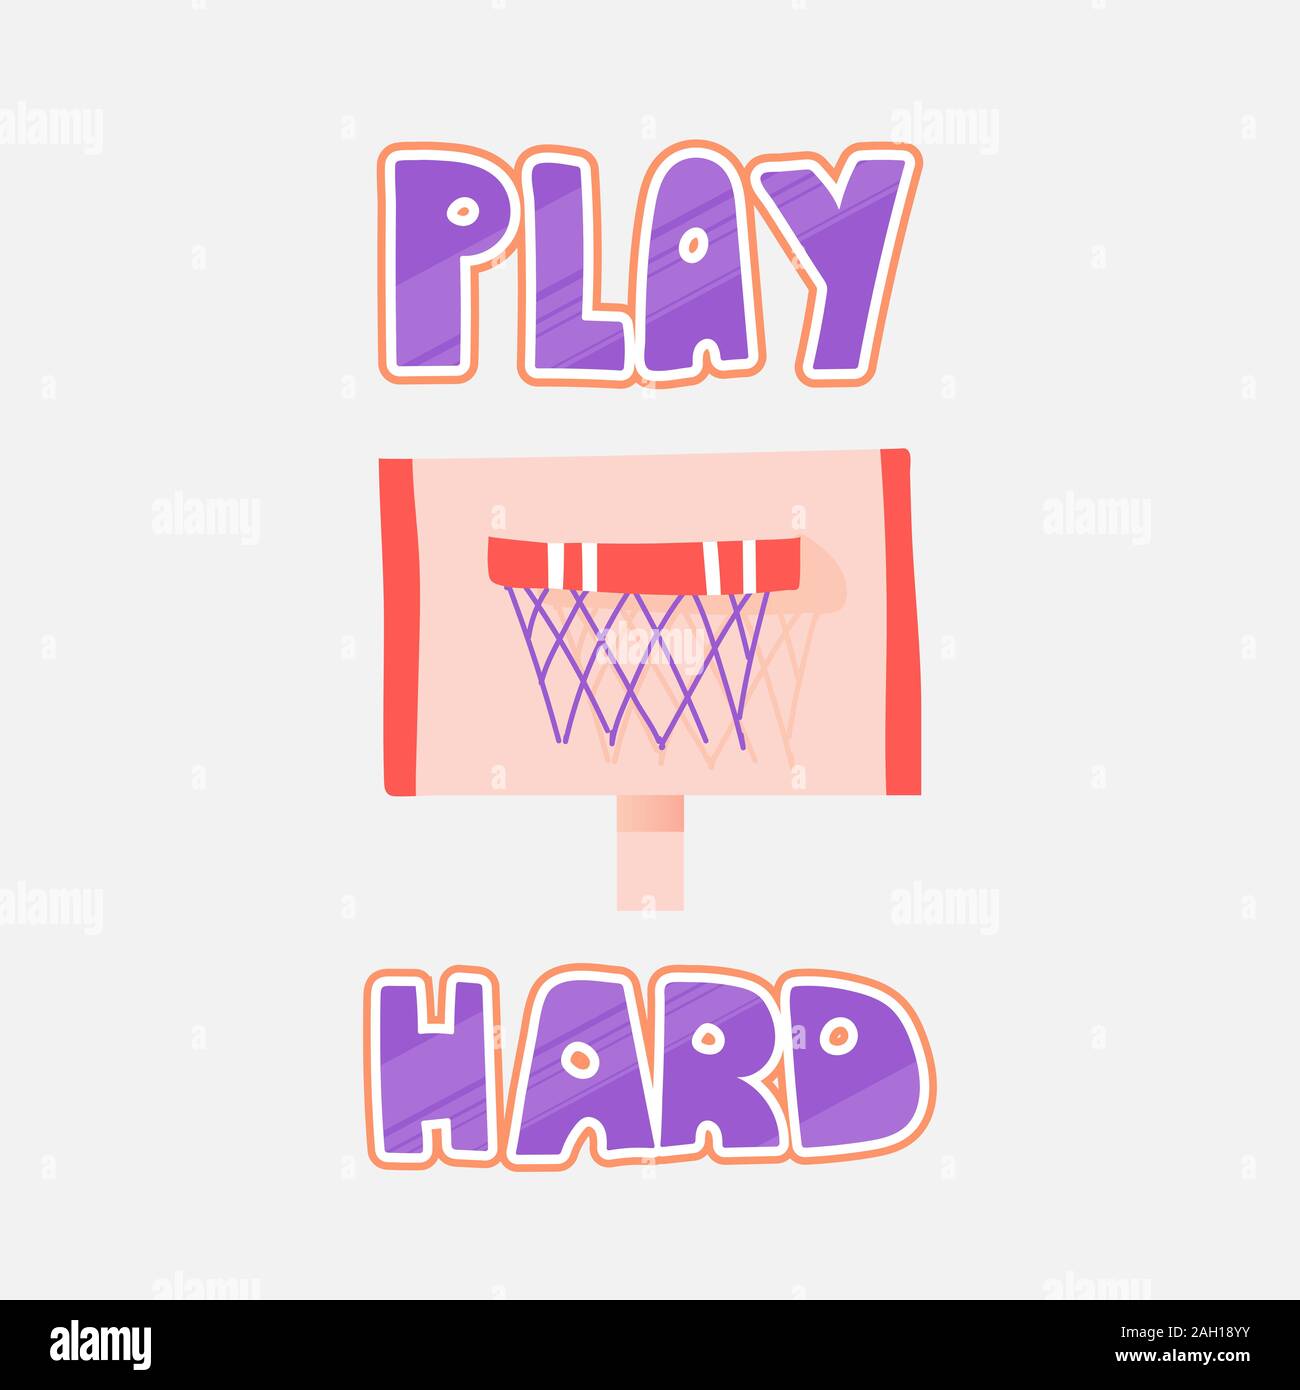 Vector illustration of basketball rim, isolated on white. Basketball rim vector flat icon with lettering about play hard. Hard playing lettering for Stock Vector